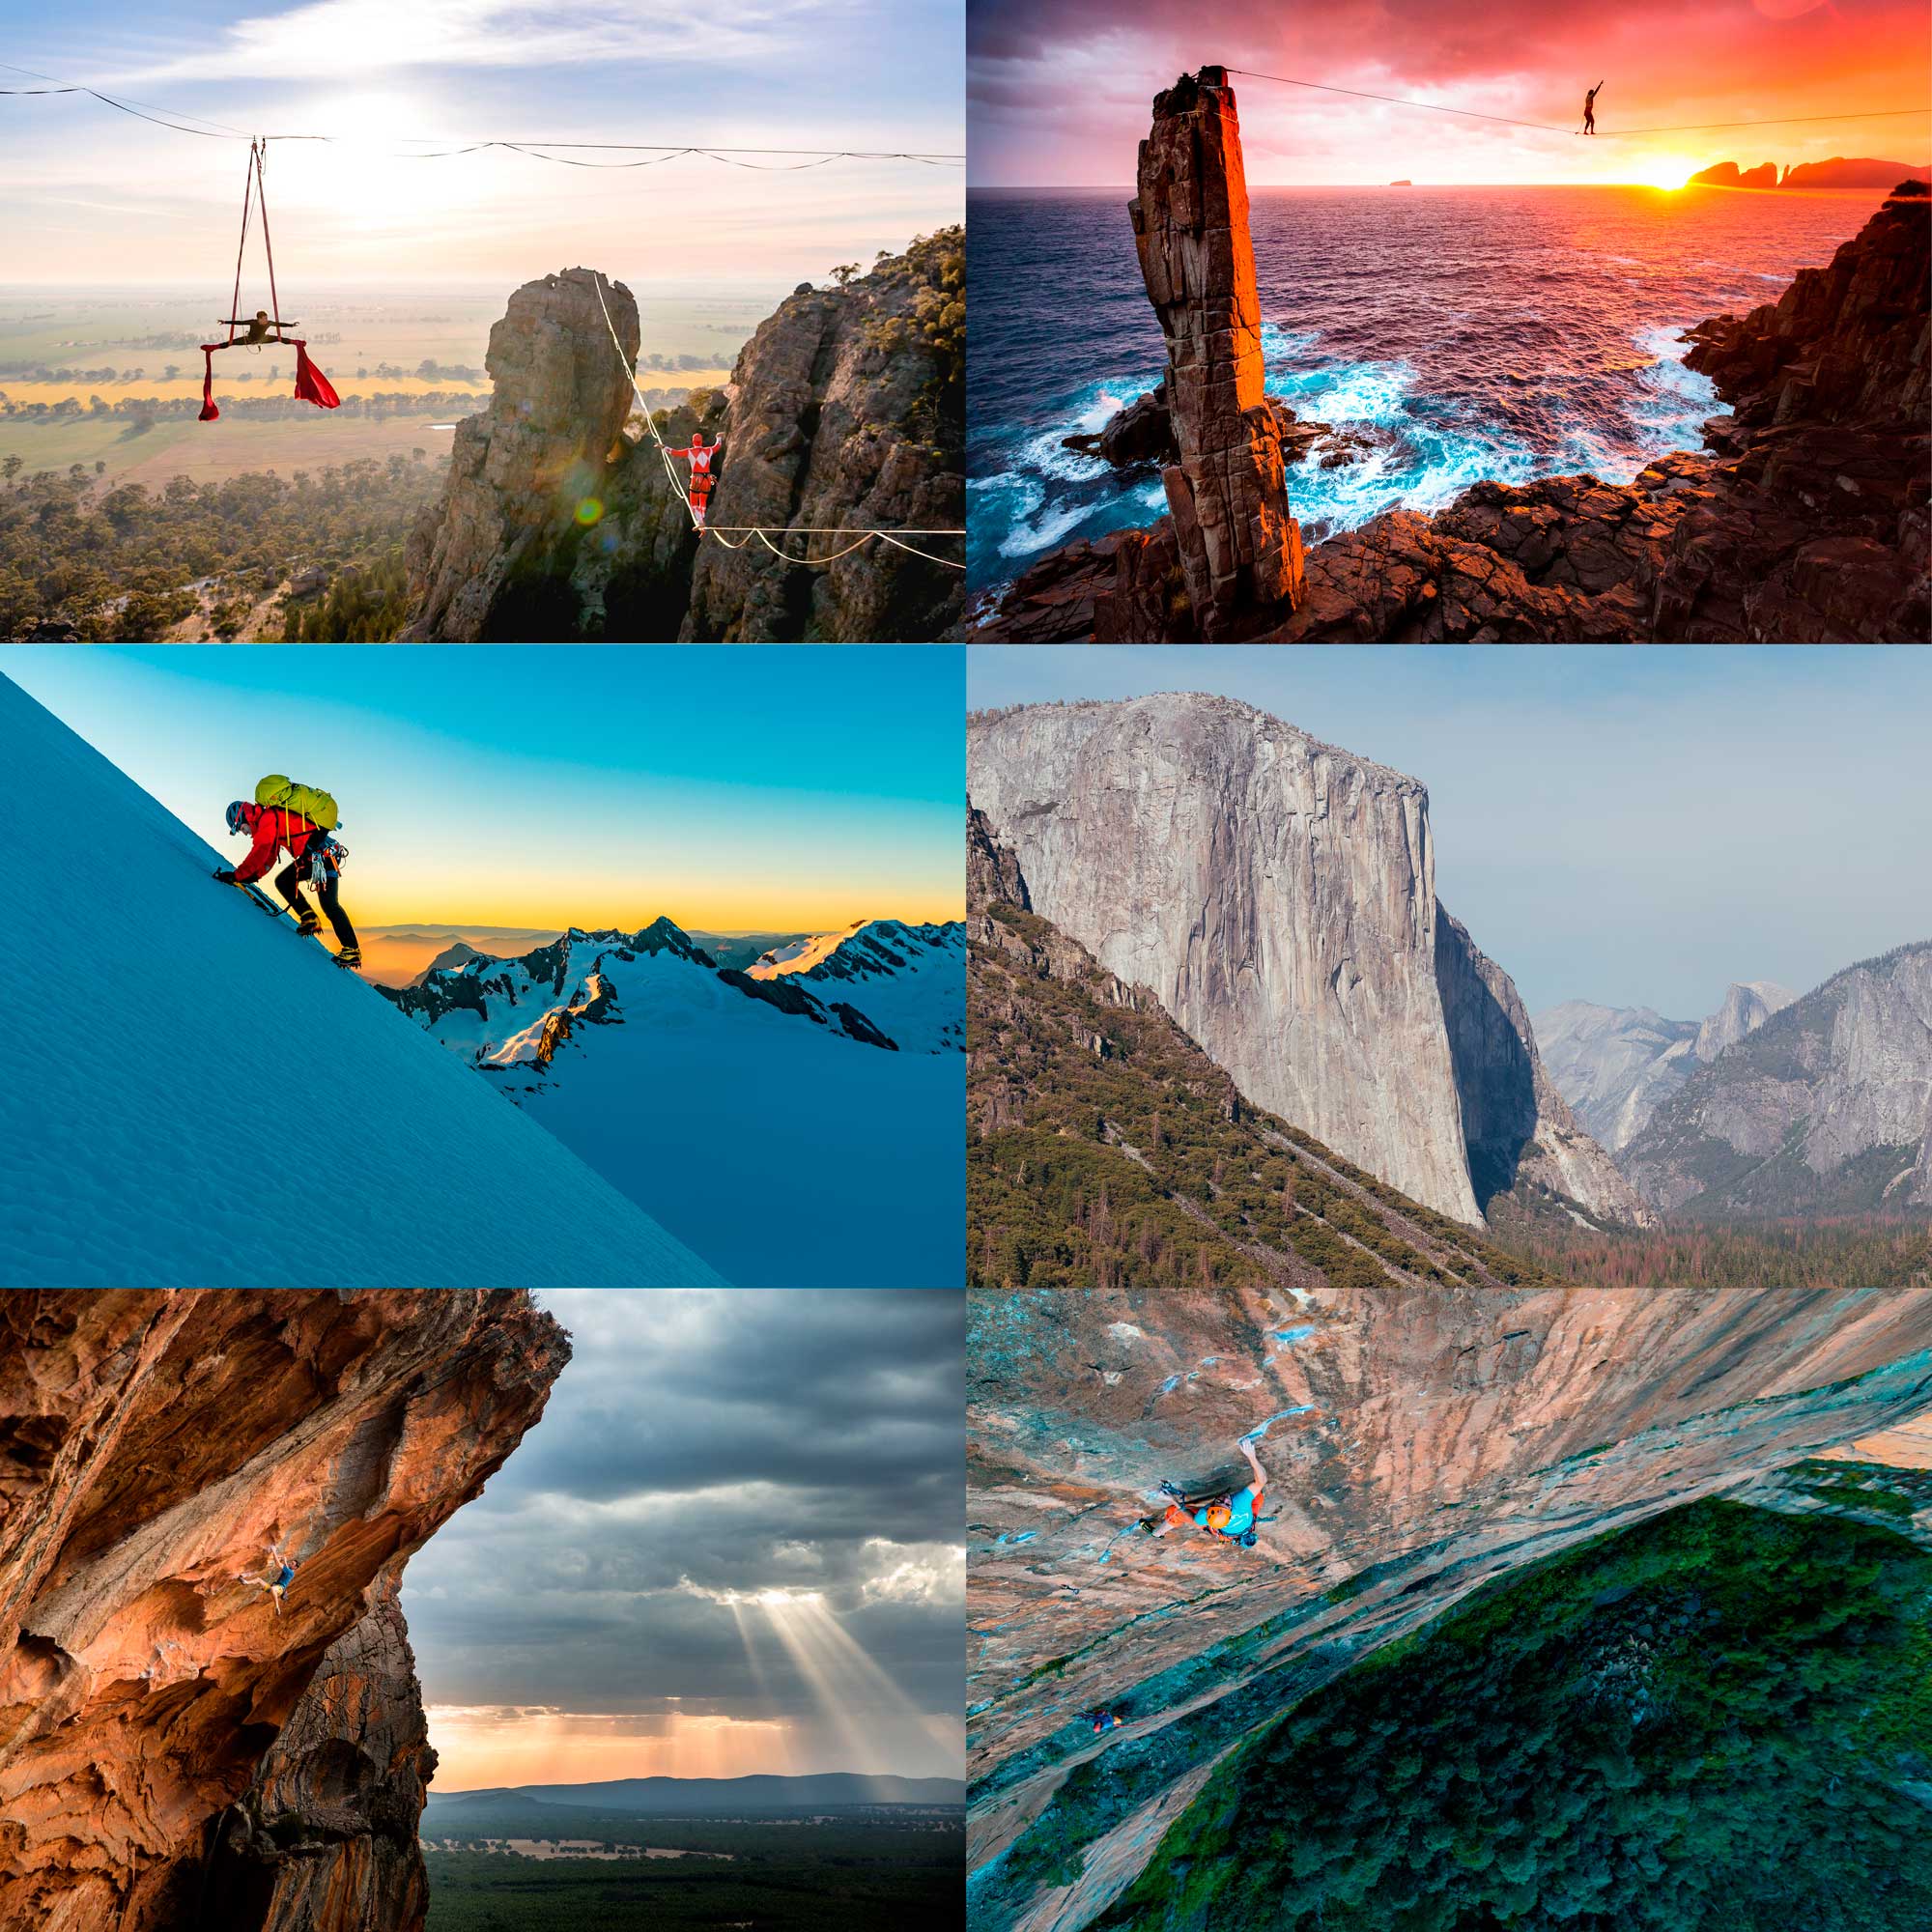 Professional Photography Prints - Climbing, Landscapes, Slacklining, Canyoning and more